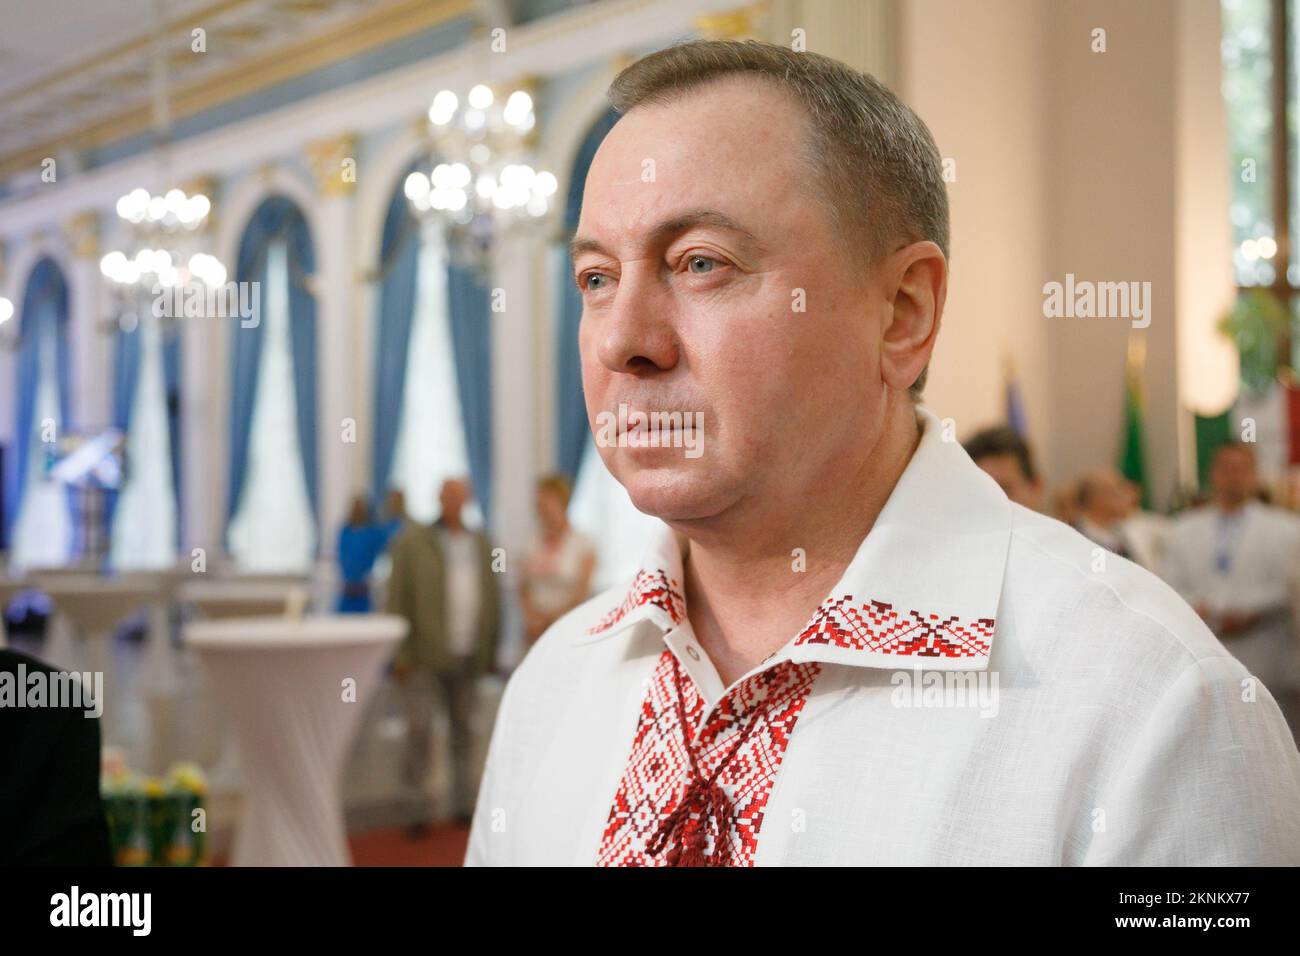 The Minister of Foreign Affairs of the Republic of Belarus Vladimir Makei (or Uladzimir Makiej) wearing a vyshyvanka, a traditional Belarusian embroidered shirt, answers journalists during the event called In Belarus Like At Home, organized by his Ministry for foreign diplomats. Vladimir Vladimirovich Makei (or Uladzimir Makiej) died in Minsk on November 26, 2022. He was 64 years old. There is no information that he had a chronic illness. Belarusian authorities did not state his cause of death. Makei served as the Minister of Foreign Affairs of Belarus from 2012 till his death in 2022. Since 2 Stock Photo